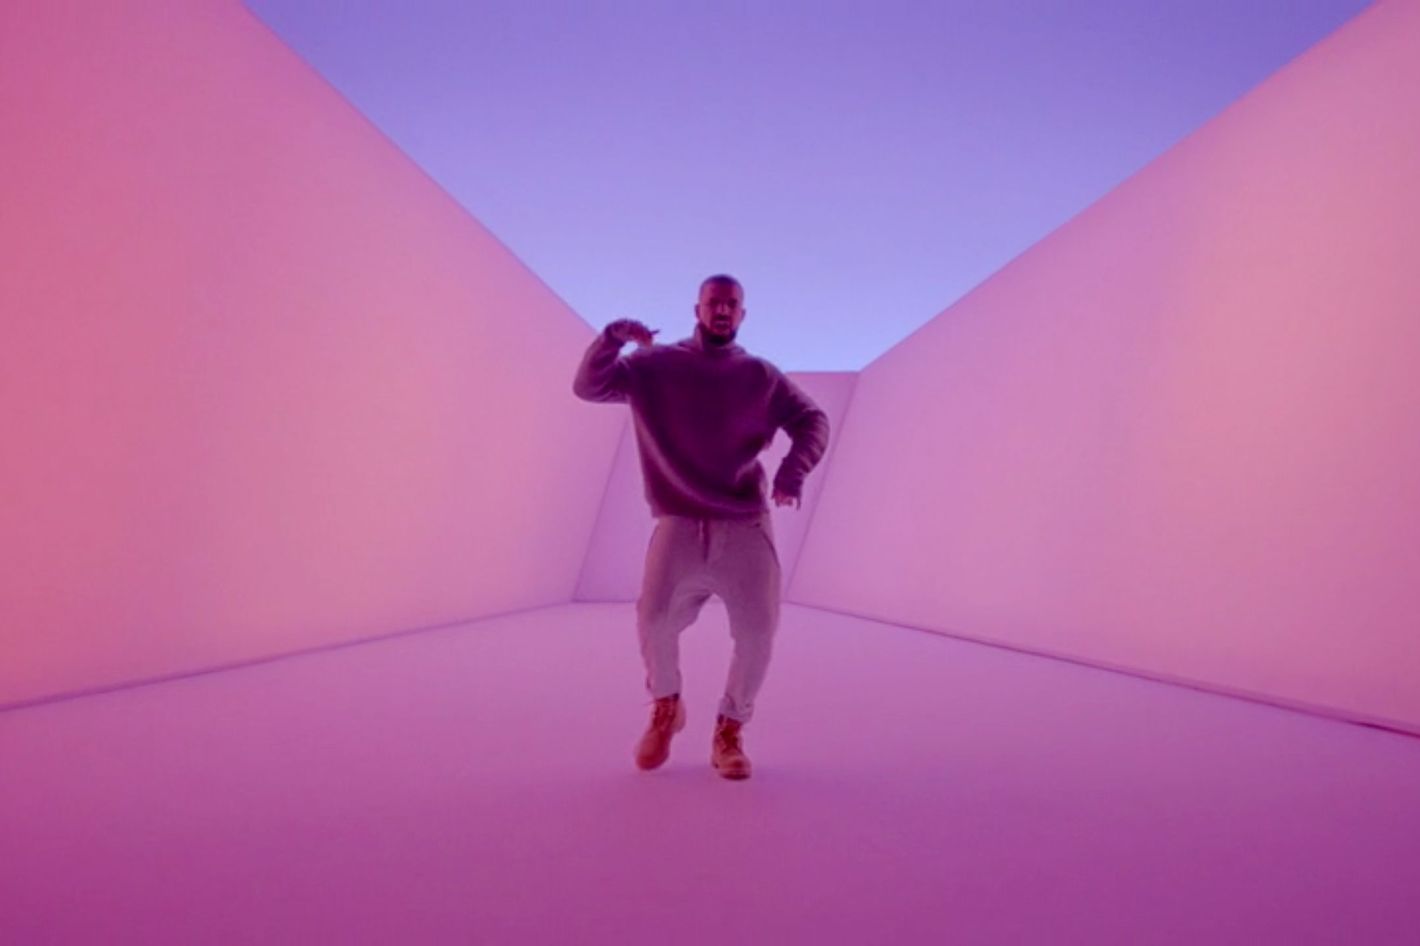 A GIF Taxonomy of Drake's Glorious Dance Moves According to 'Hotline Bling'